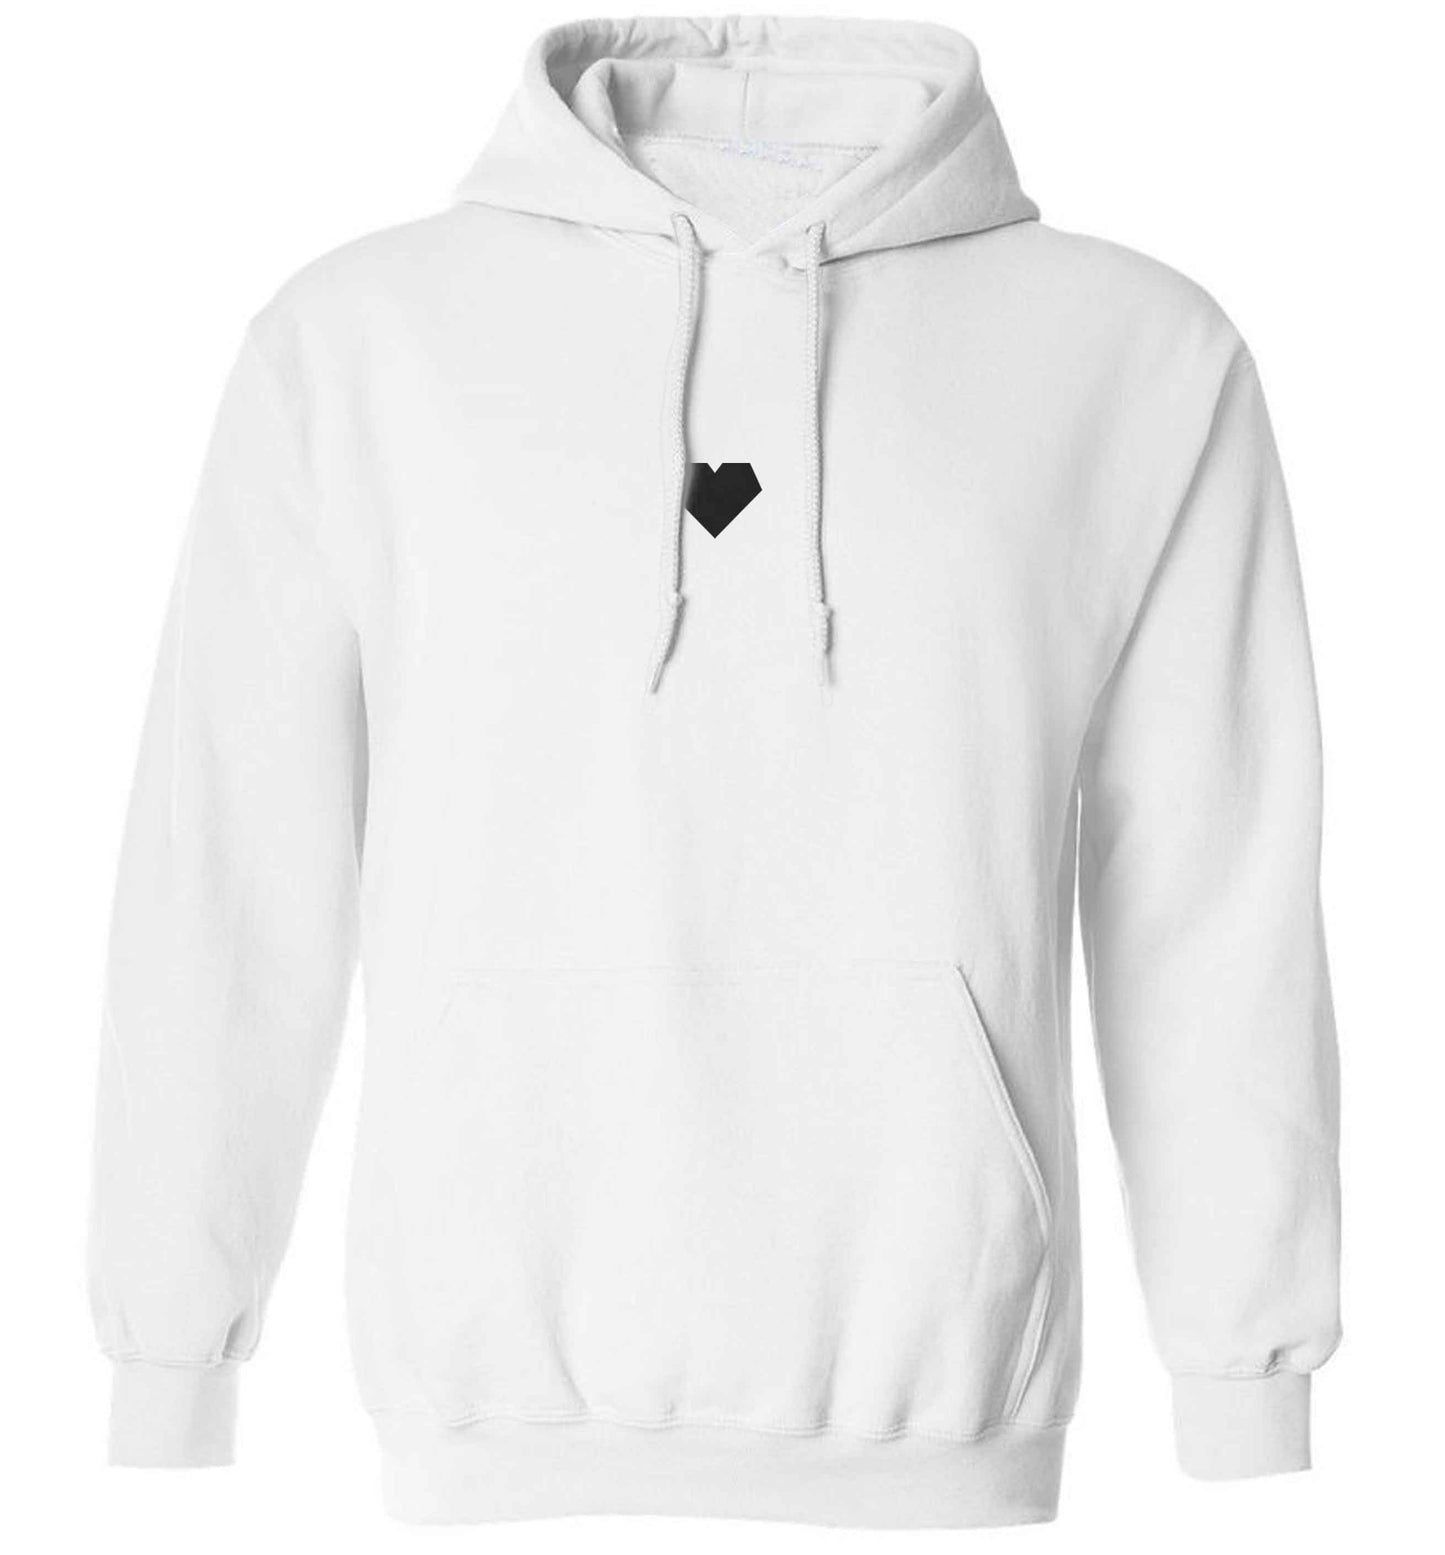 Tiny heart adults unisex white hoodie 2XL